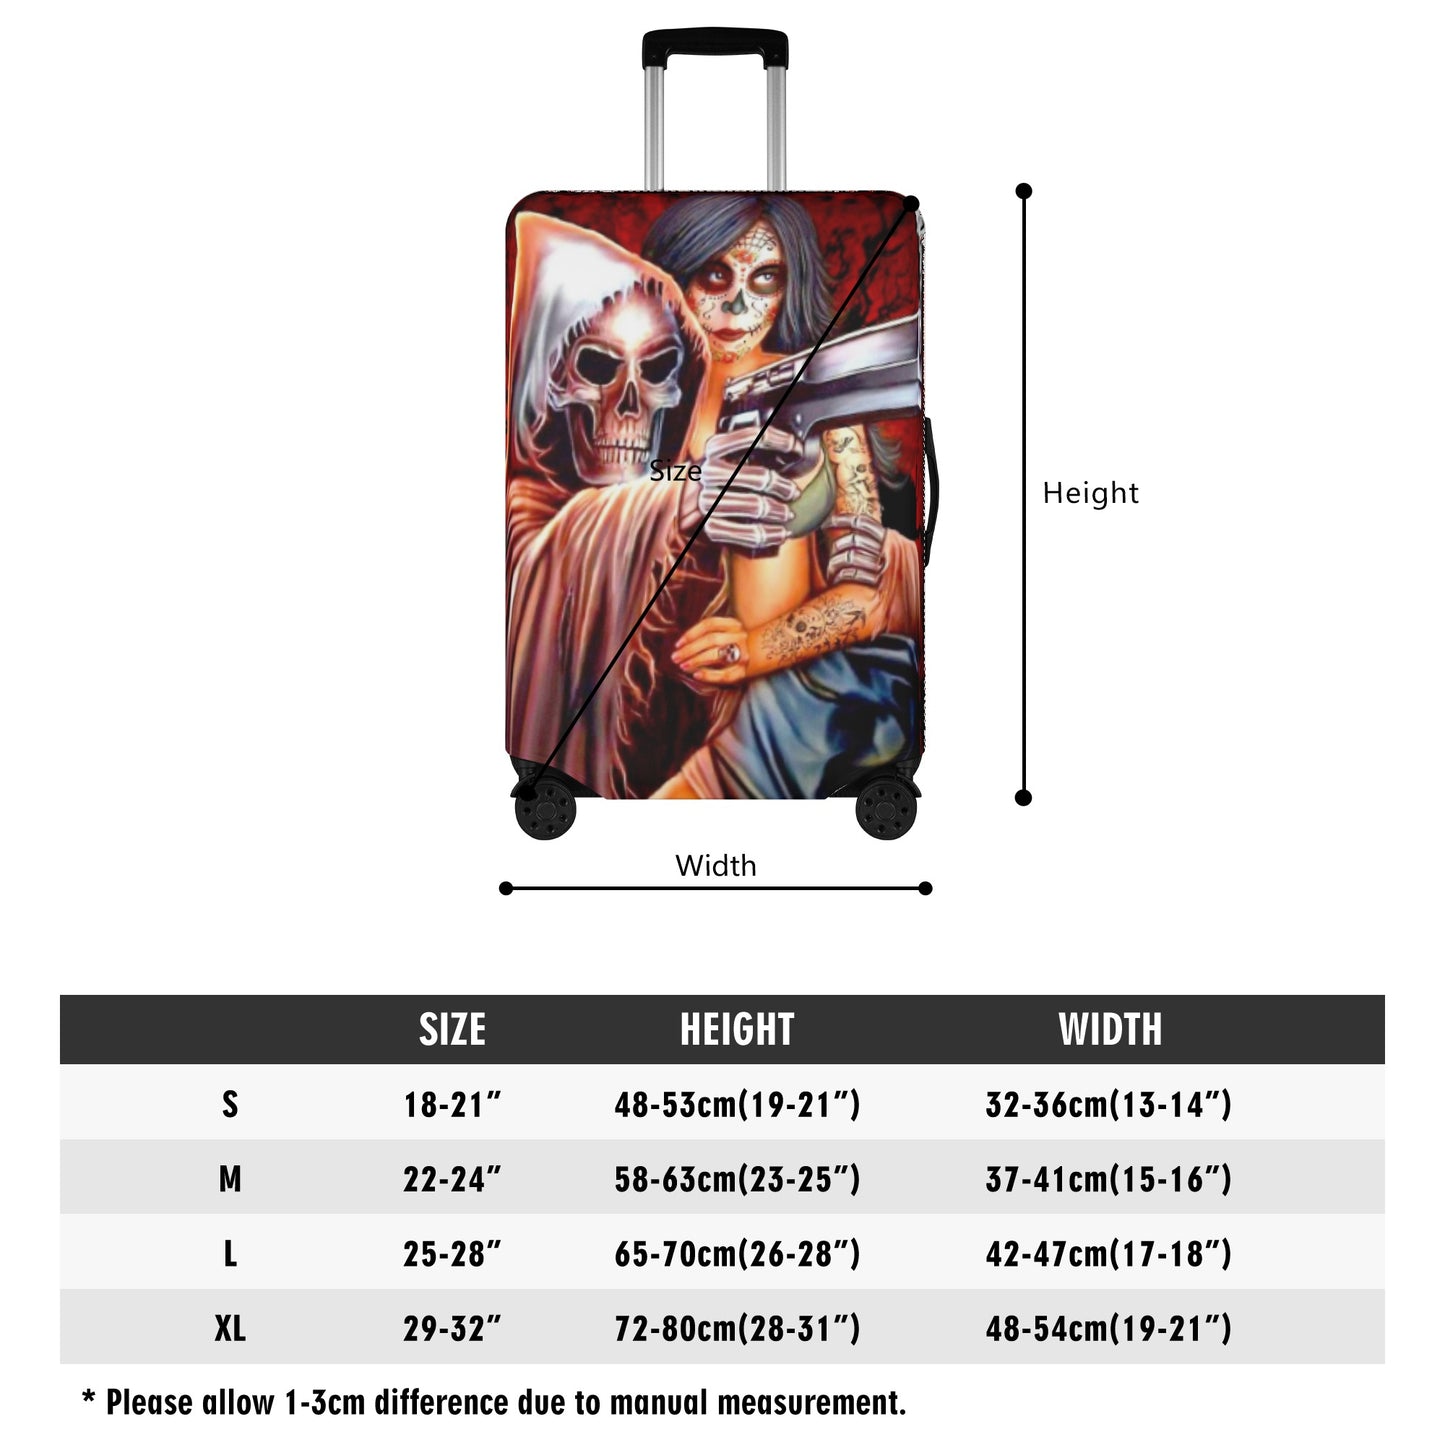 Grim reaper and girl luggage cover, skeleton suitcase cover protector